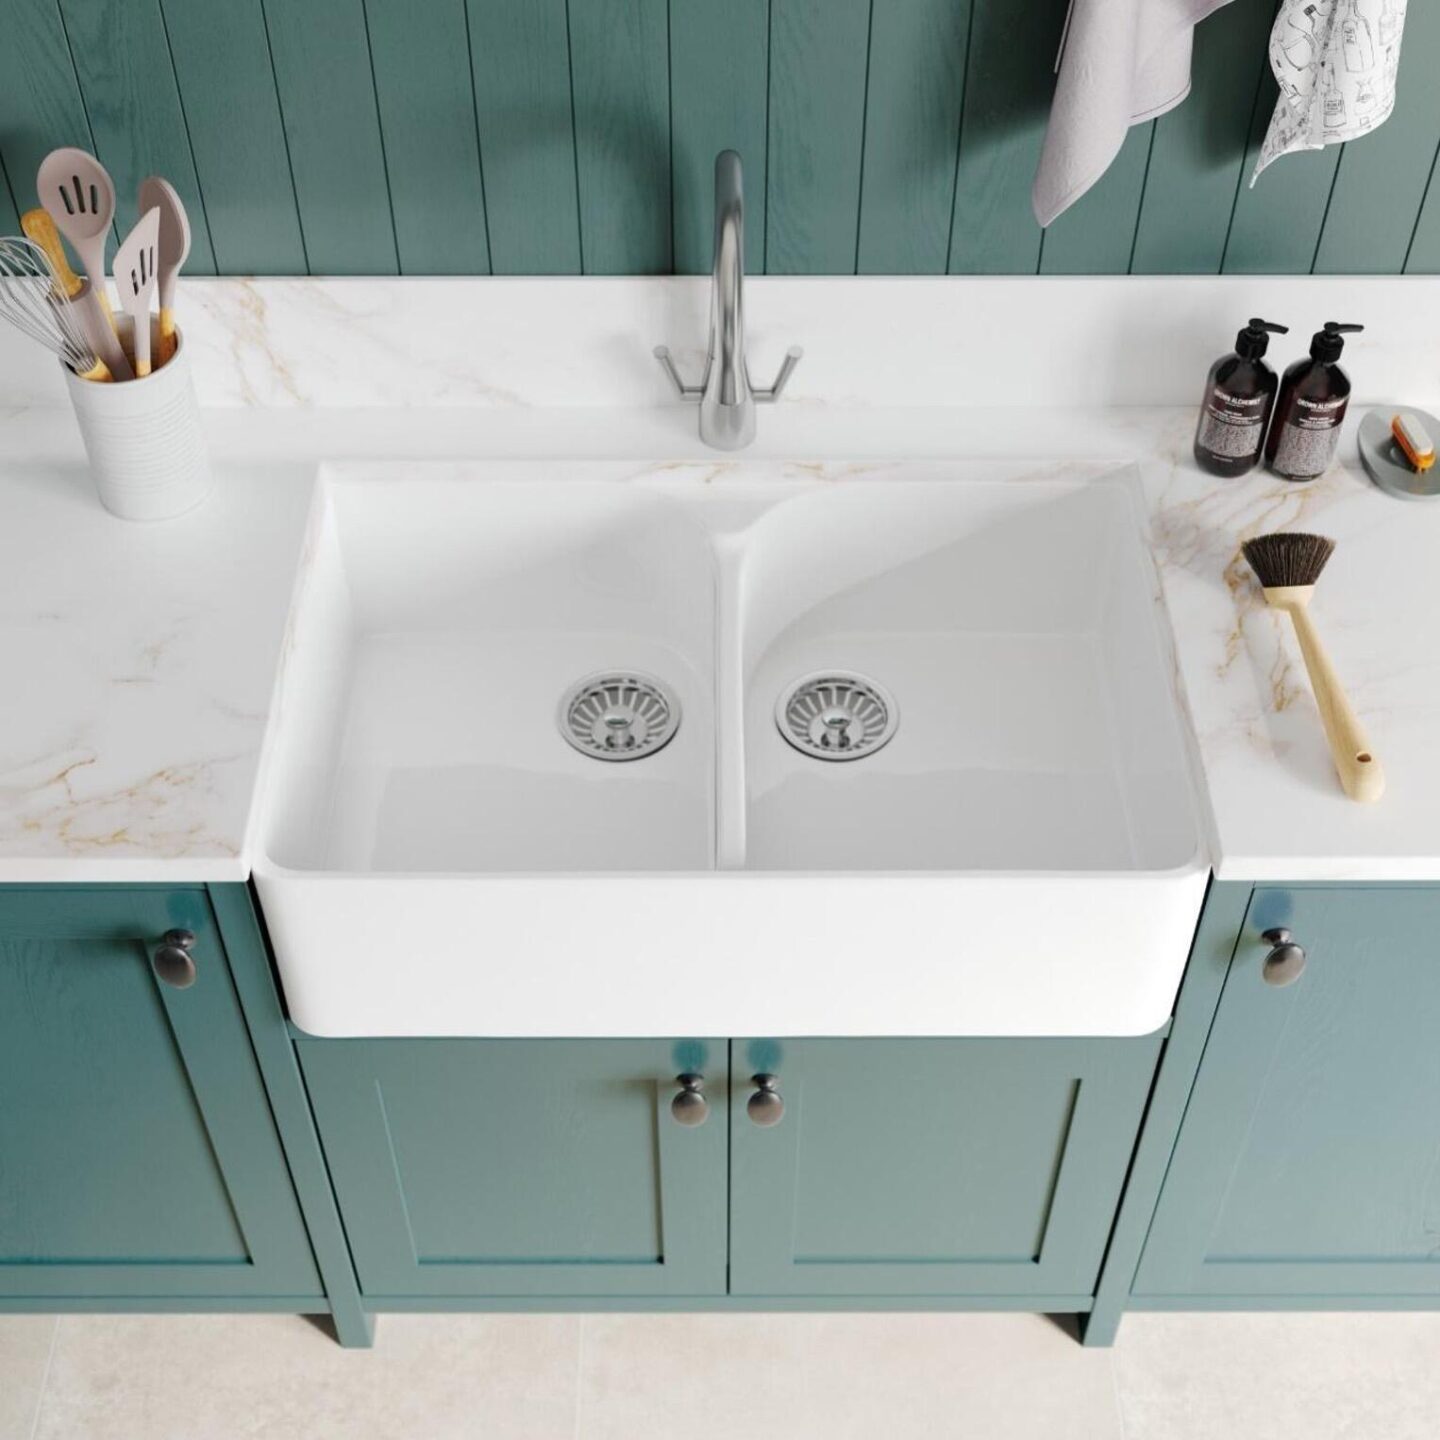 A sink with a faucet and a white counter top